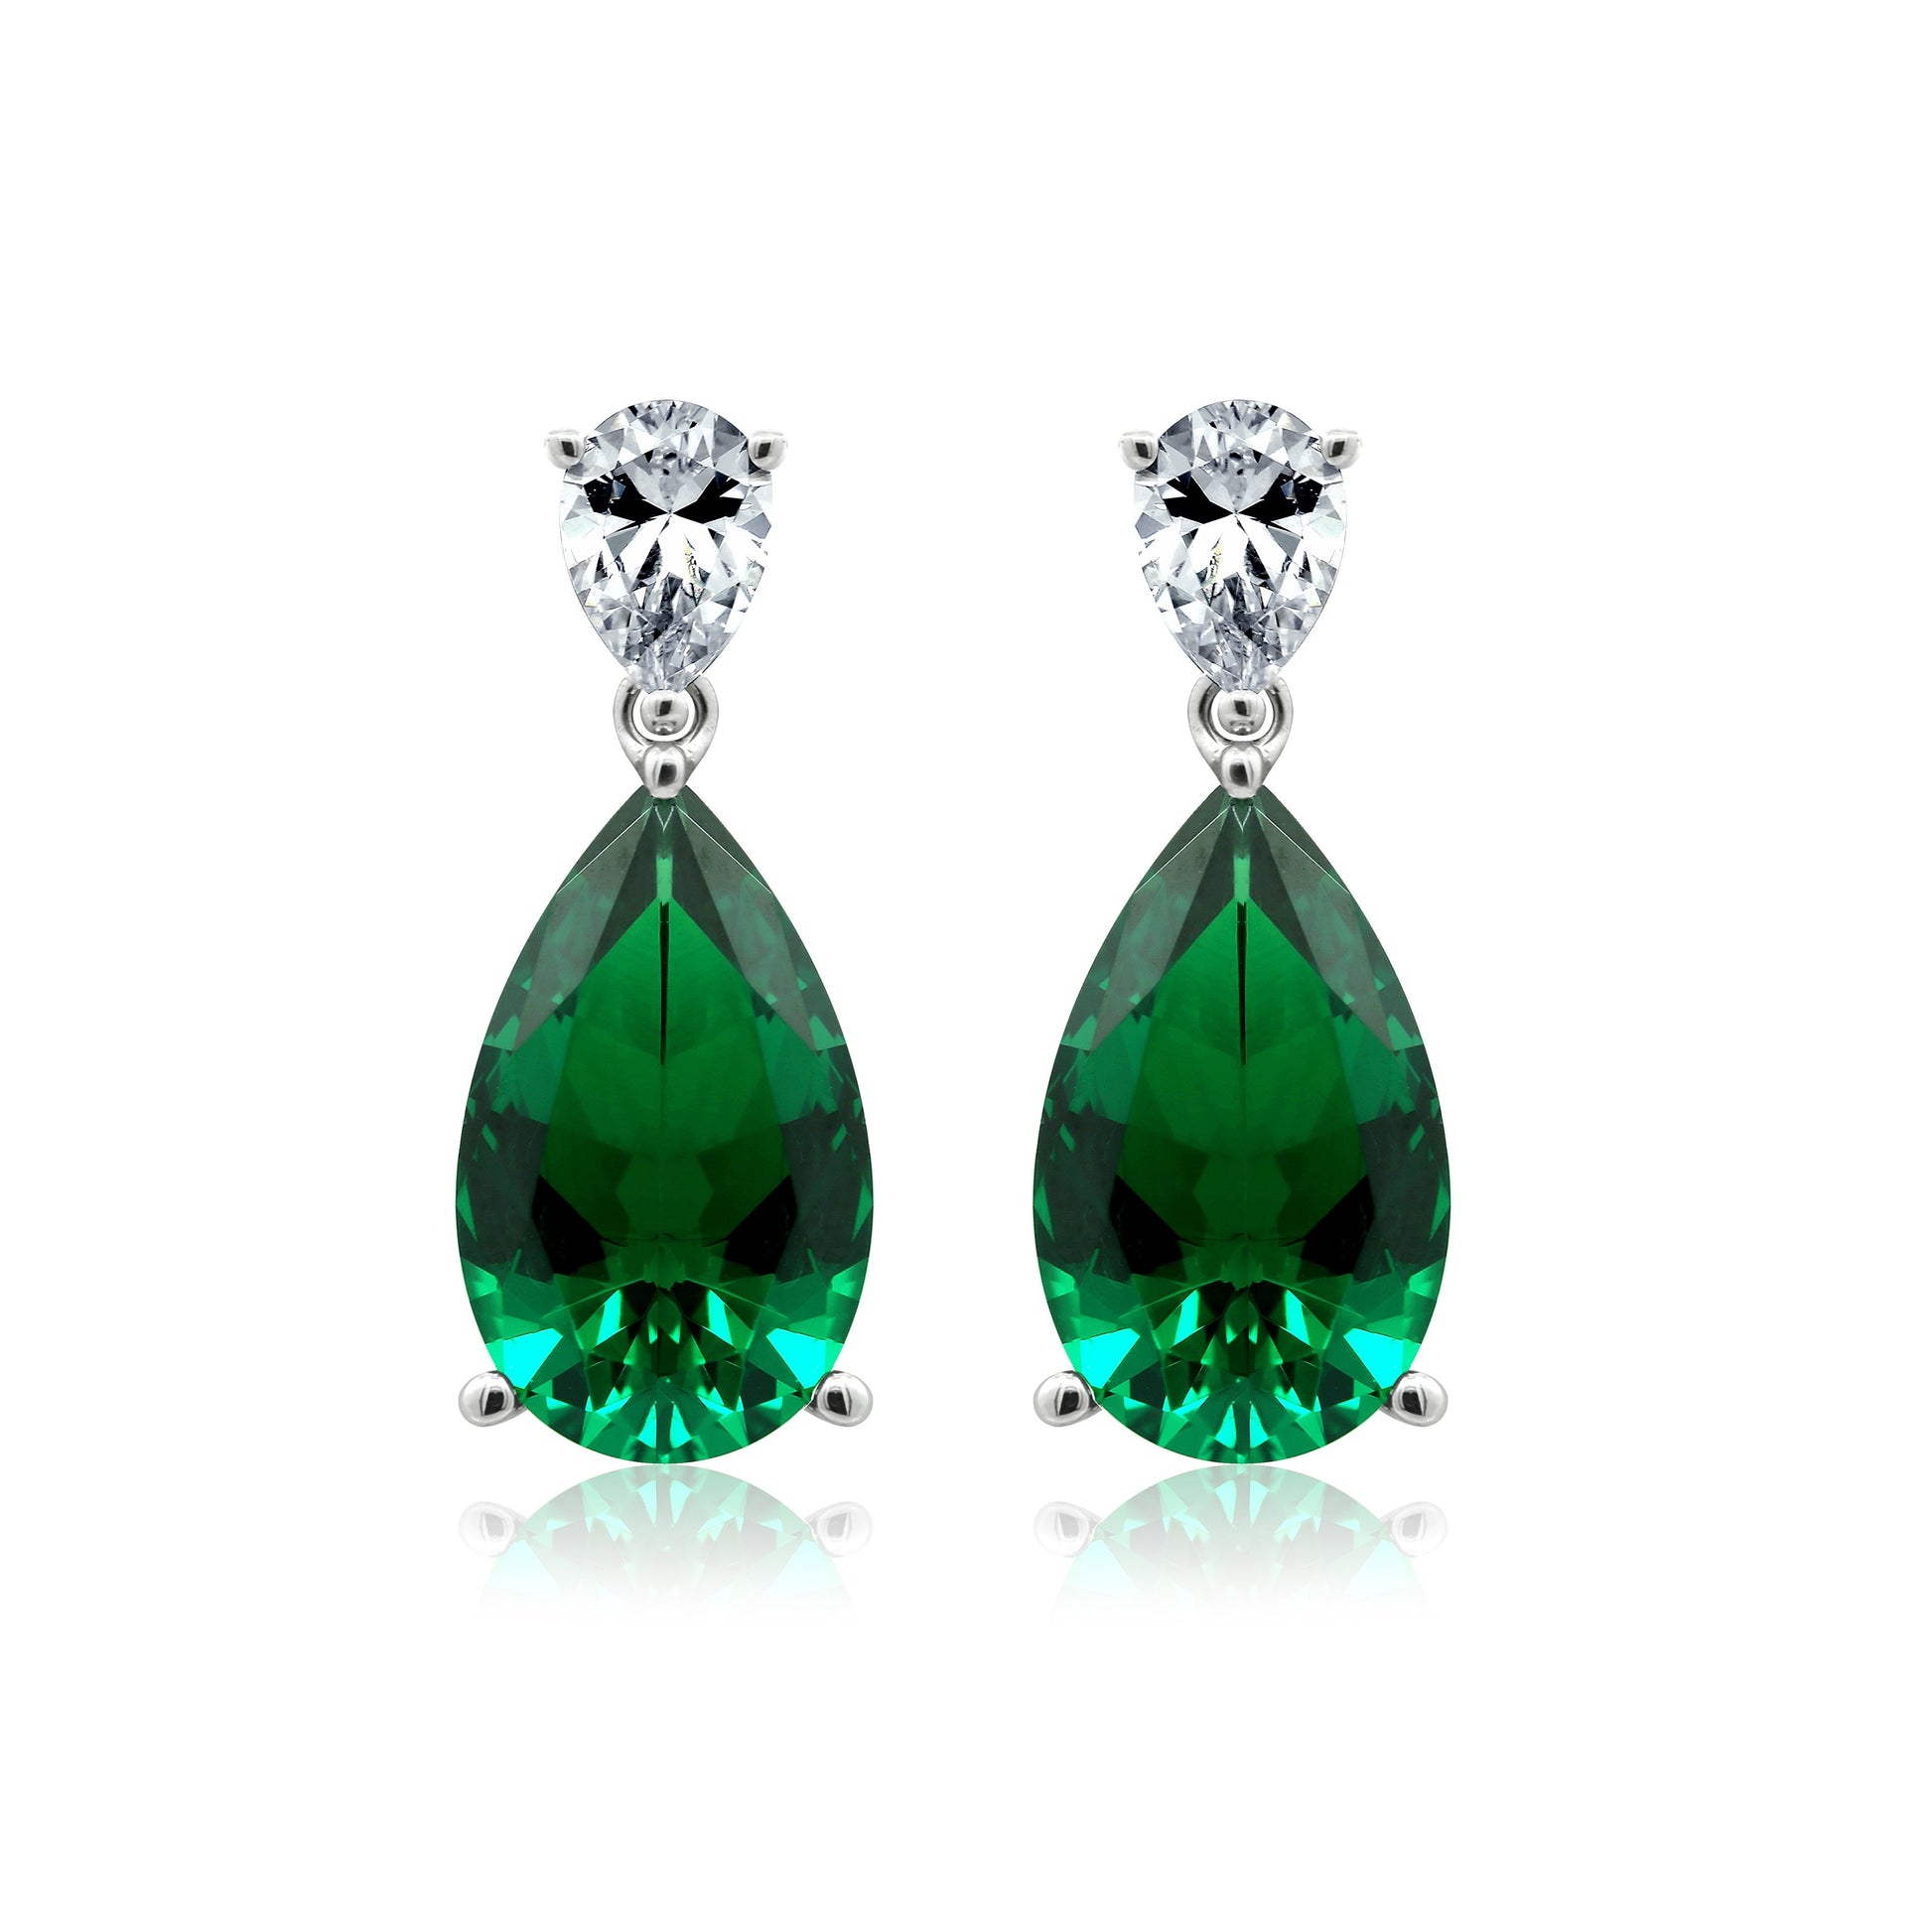 Kiera Couture RED CARPET EMERALD PEAR DROP EARRING